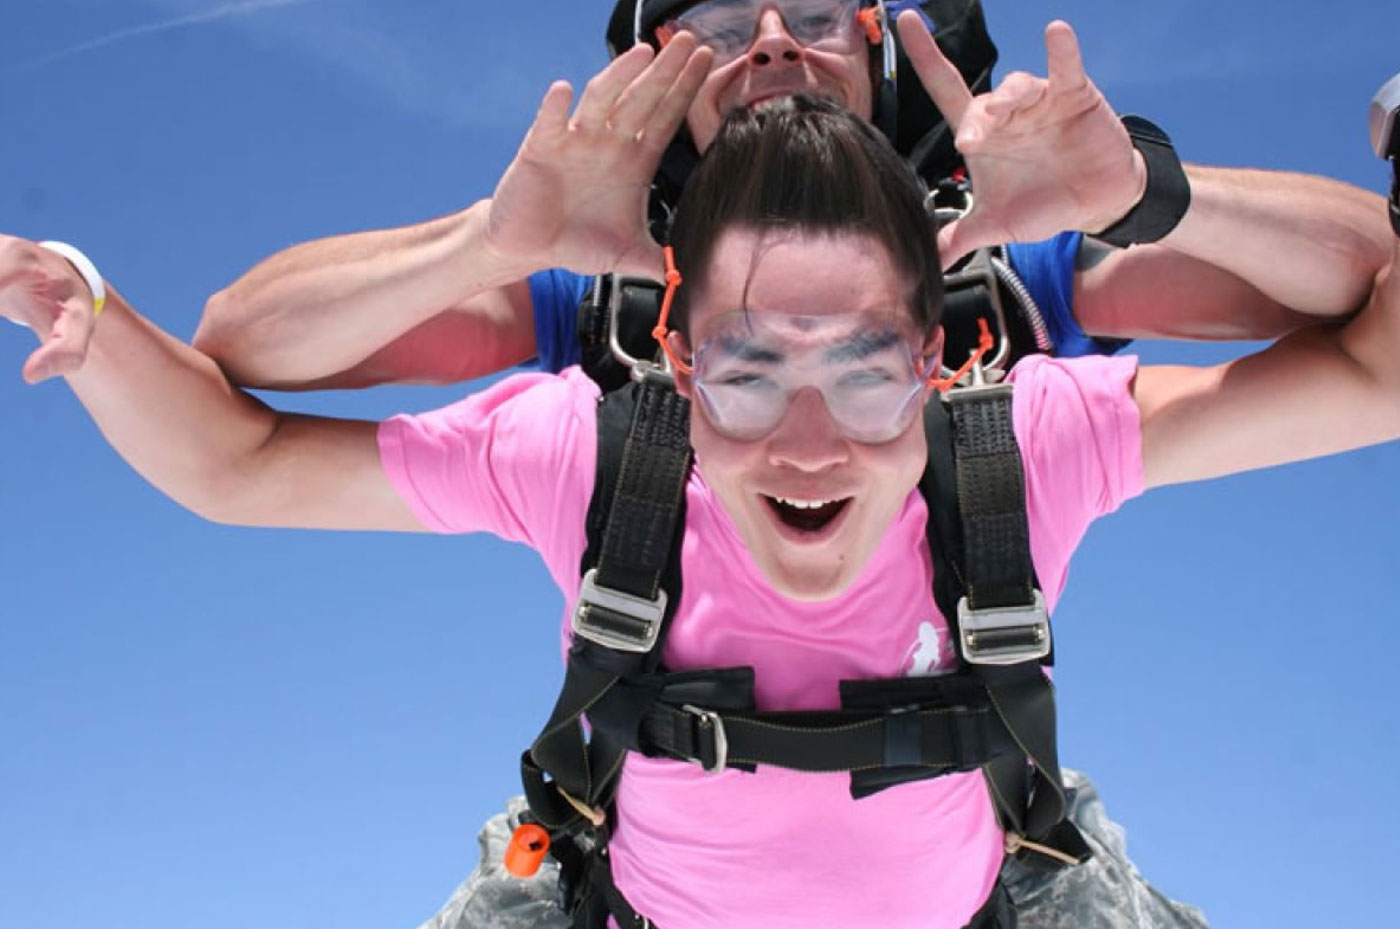 Tandem skydiving video packages for with great views of Tennessee